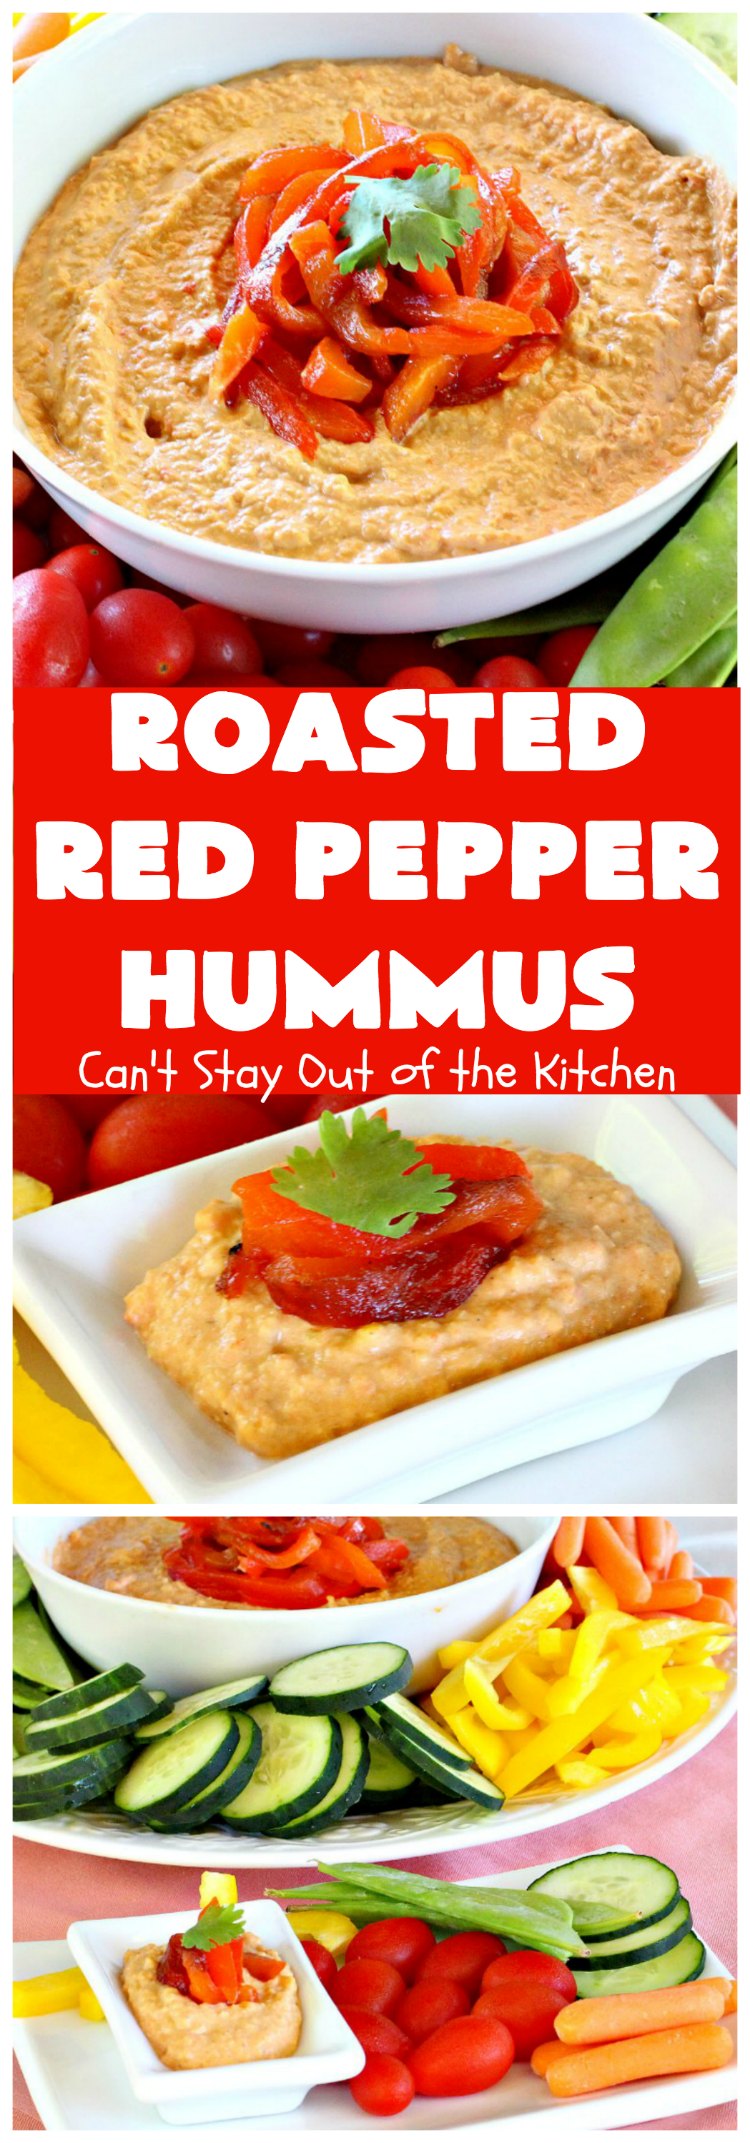 Roasted Red Pepper Hummus | Can't Stay Out of the Kitchen